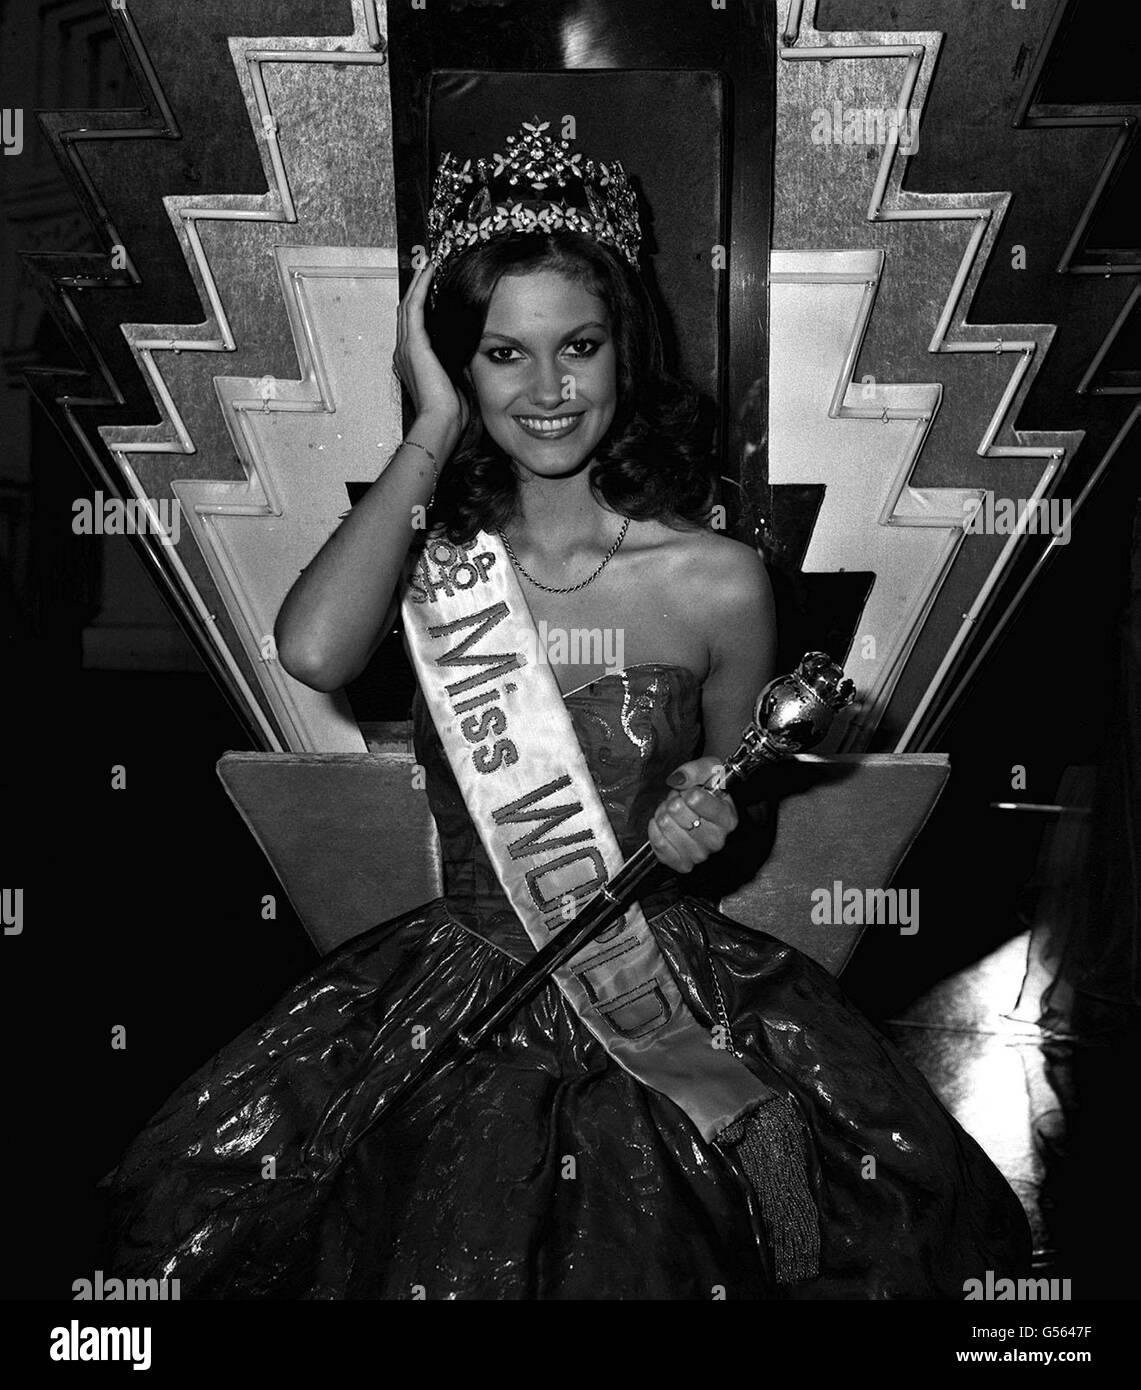 MISS WORLD 1983: Miss United Kingdom, 19 year old Sarah Jane Hutt, after winning the 1983 Miss World competition at the Royal Albert Hall, London, to take prizes in excess of 30,000. Snooker-loving Sarah, also voted the Continental Queen of Beauty for Europe, beat Miss Columbia (2nd) and Miss Brazil (3rd). Stock Photo